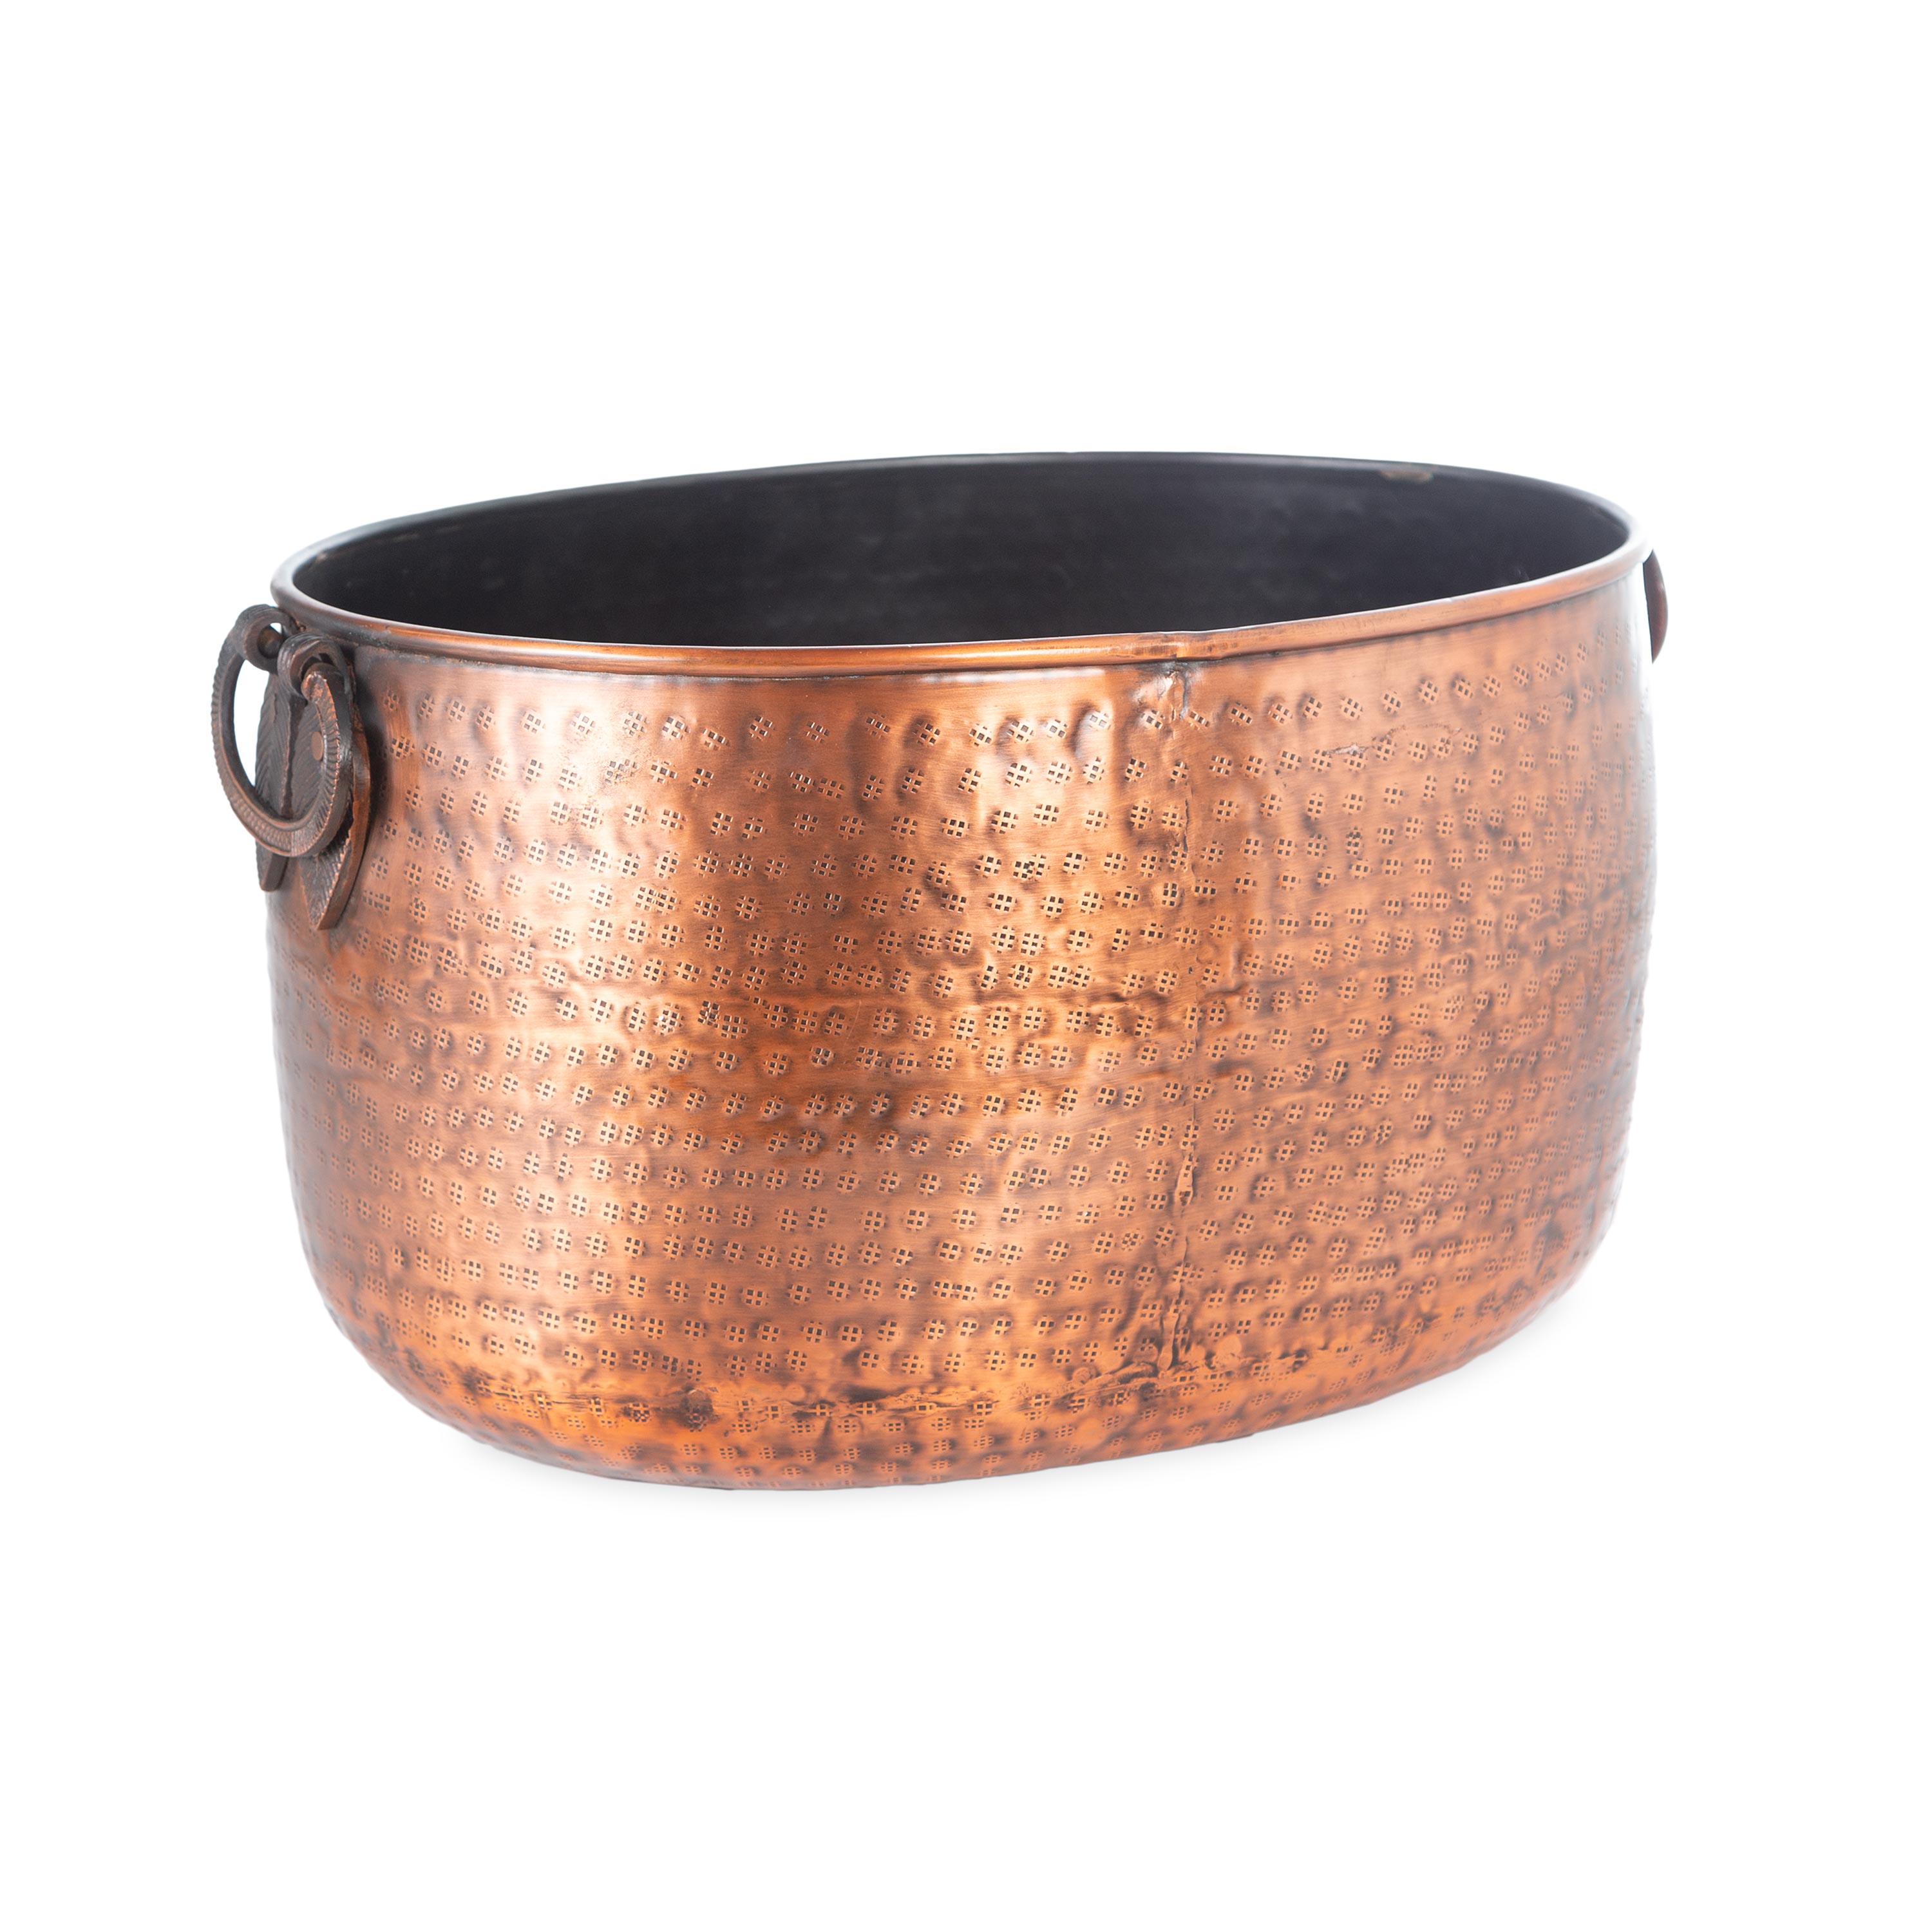 Copper-Finished Hammered Metal Firewood Buckets with Leaf Handles, Small